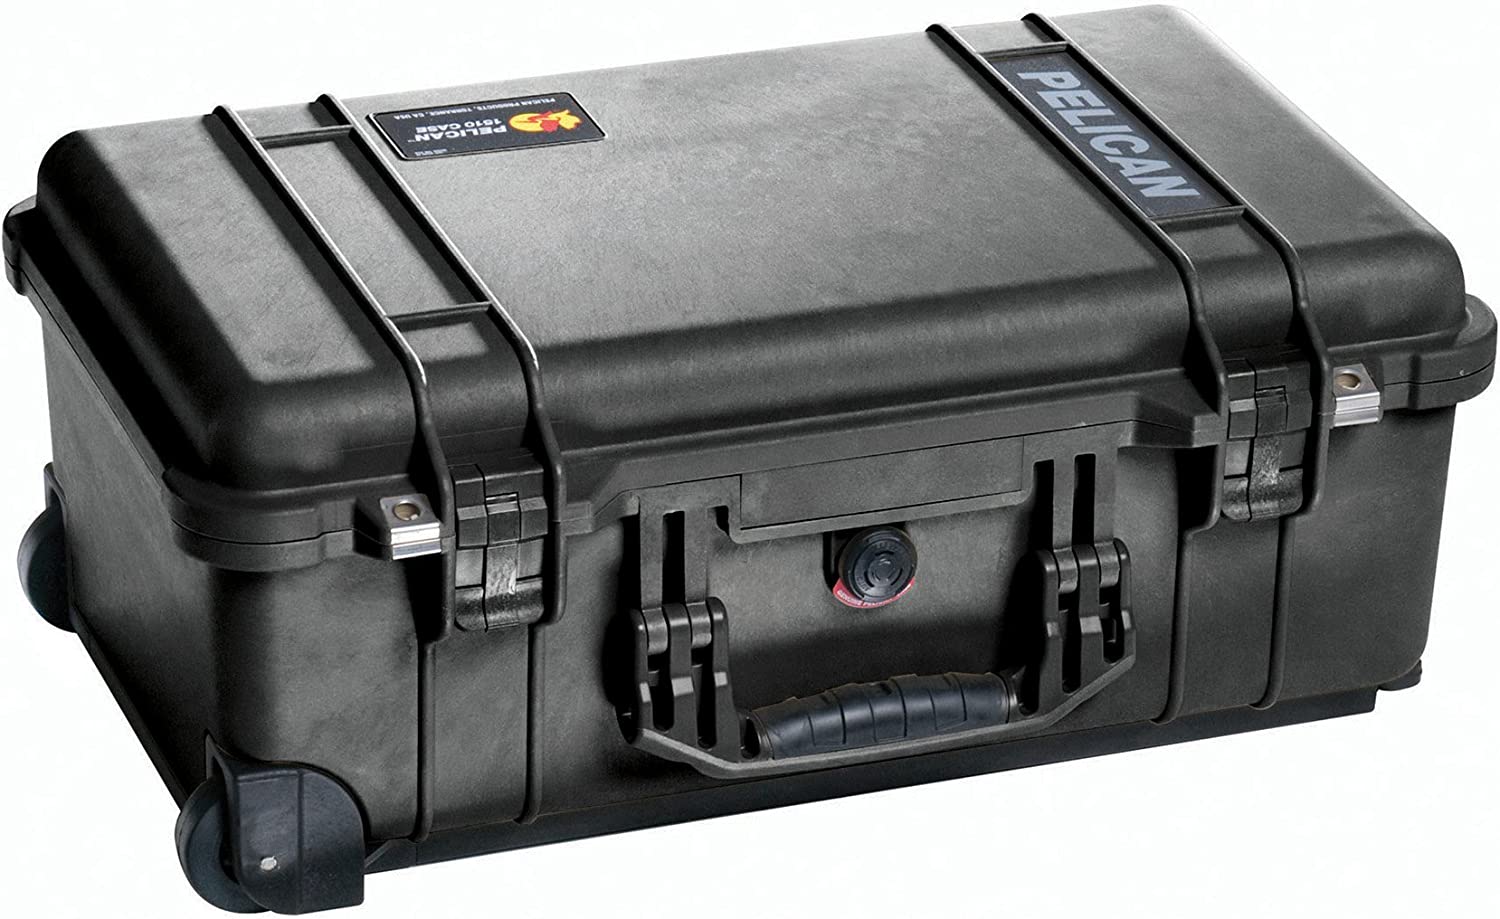 Pelican 1510- Good video camera bag for traveling  image 